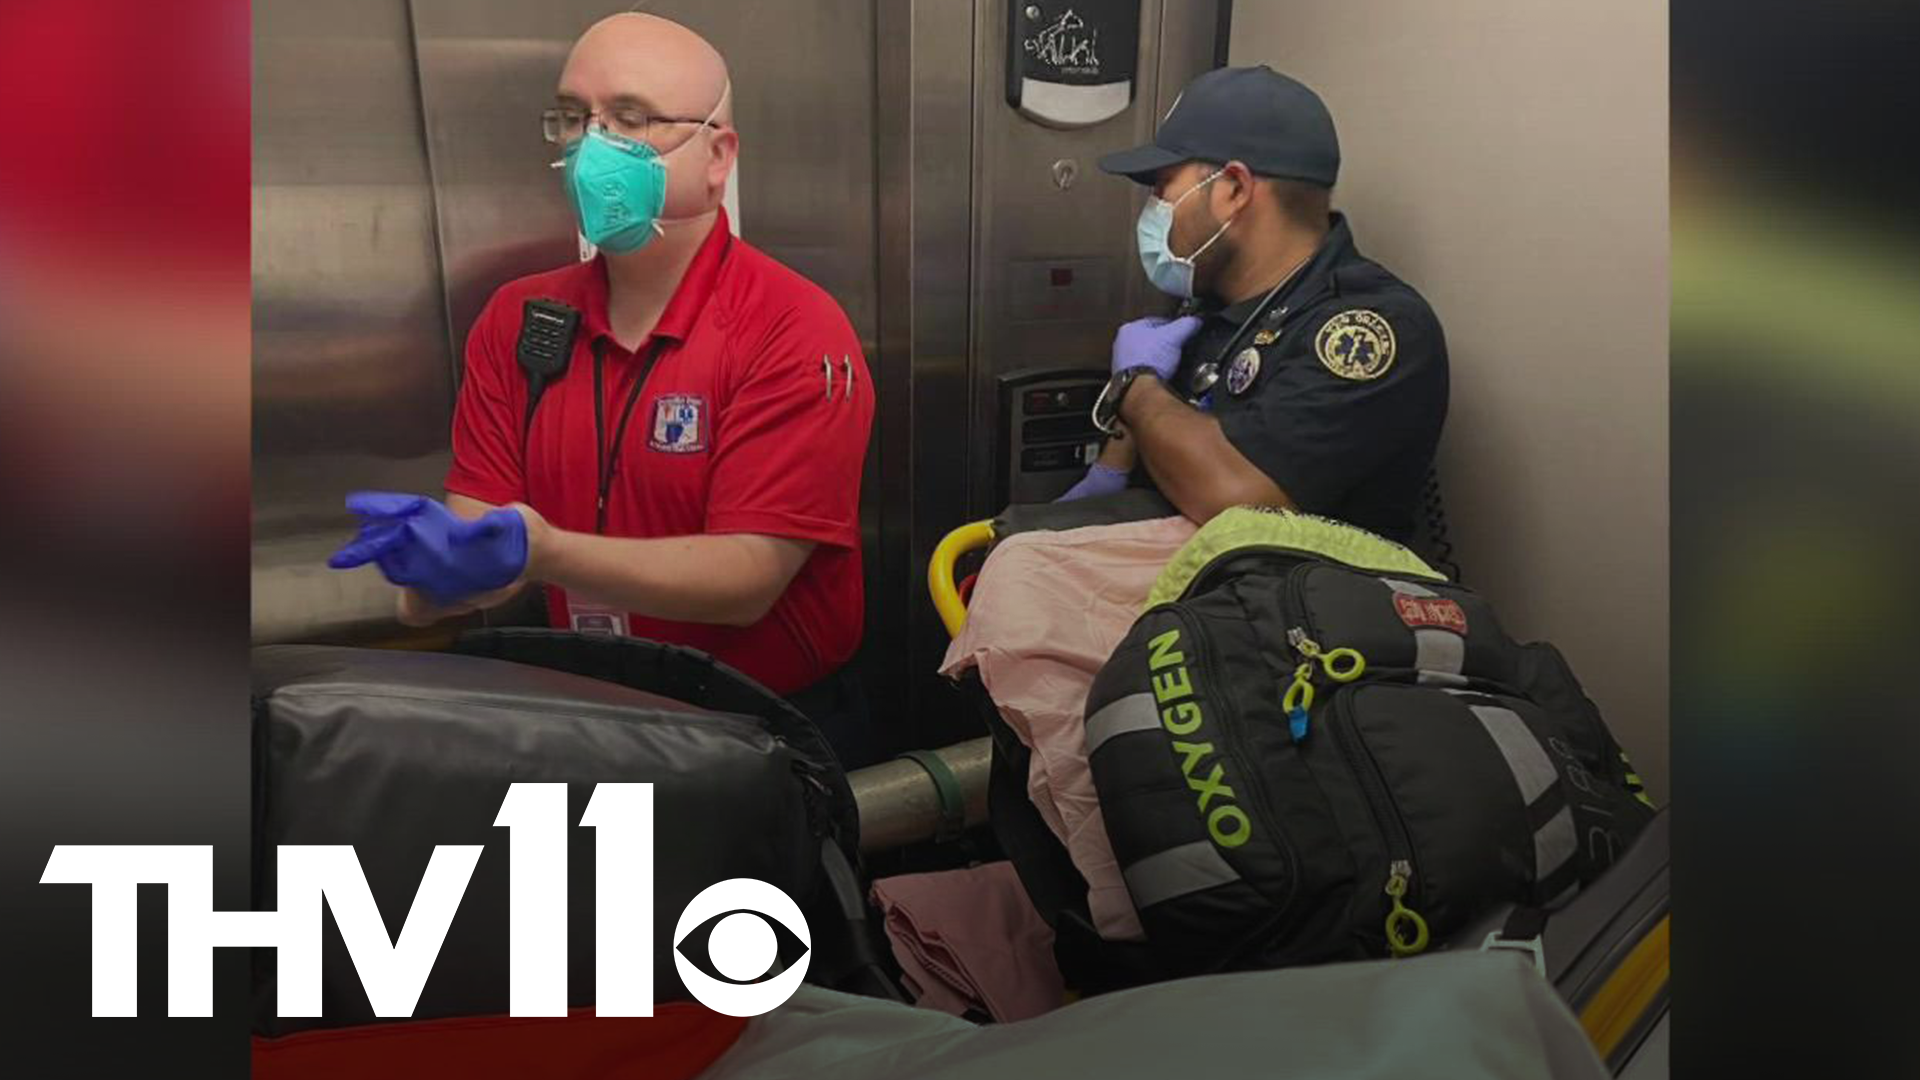 The COVID-19 surge is prompting many healthcare workers to pack their bags and travel across state lines to help overwhelmed hospitals elsewhere.